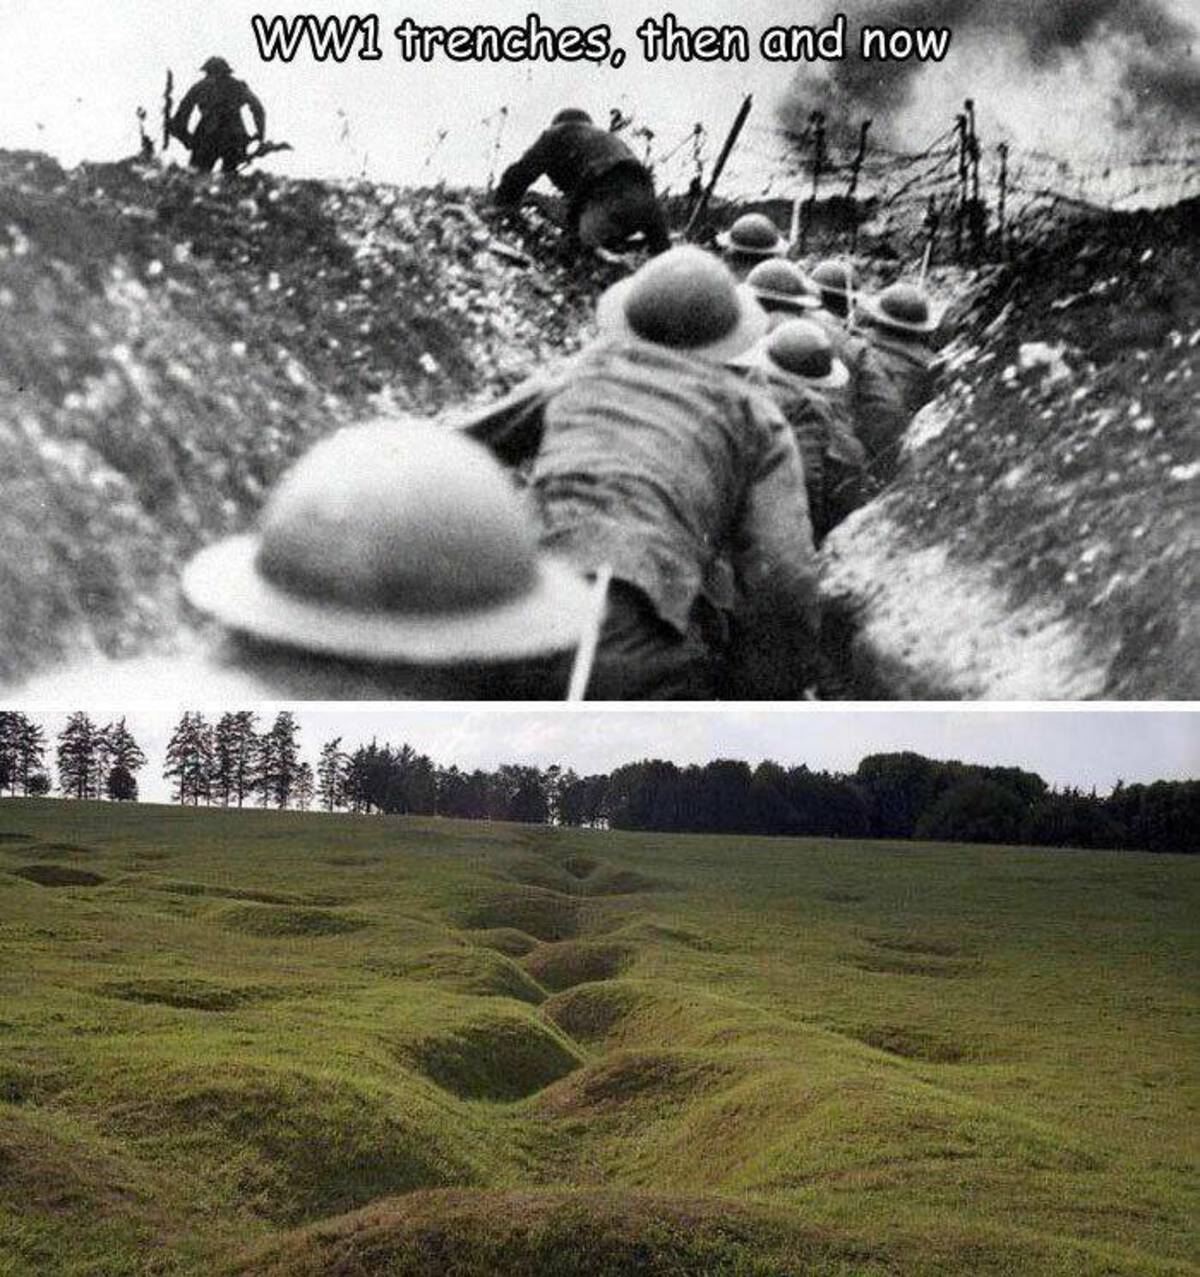 war ww1 - WW1 trenches, then and now